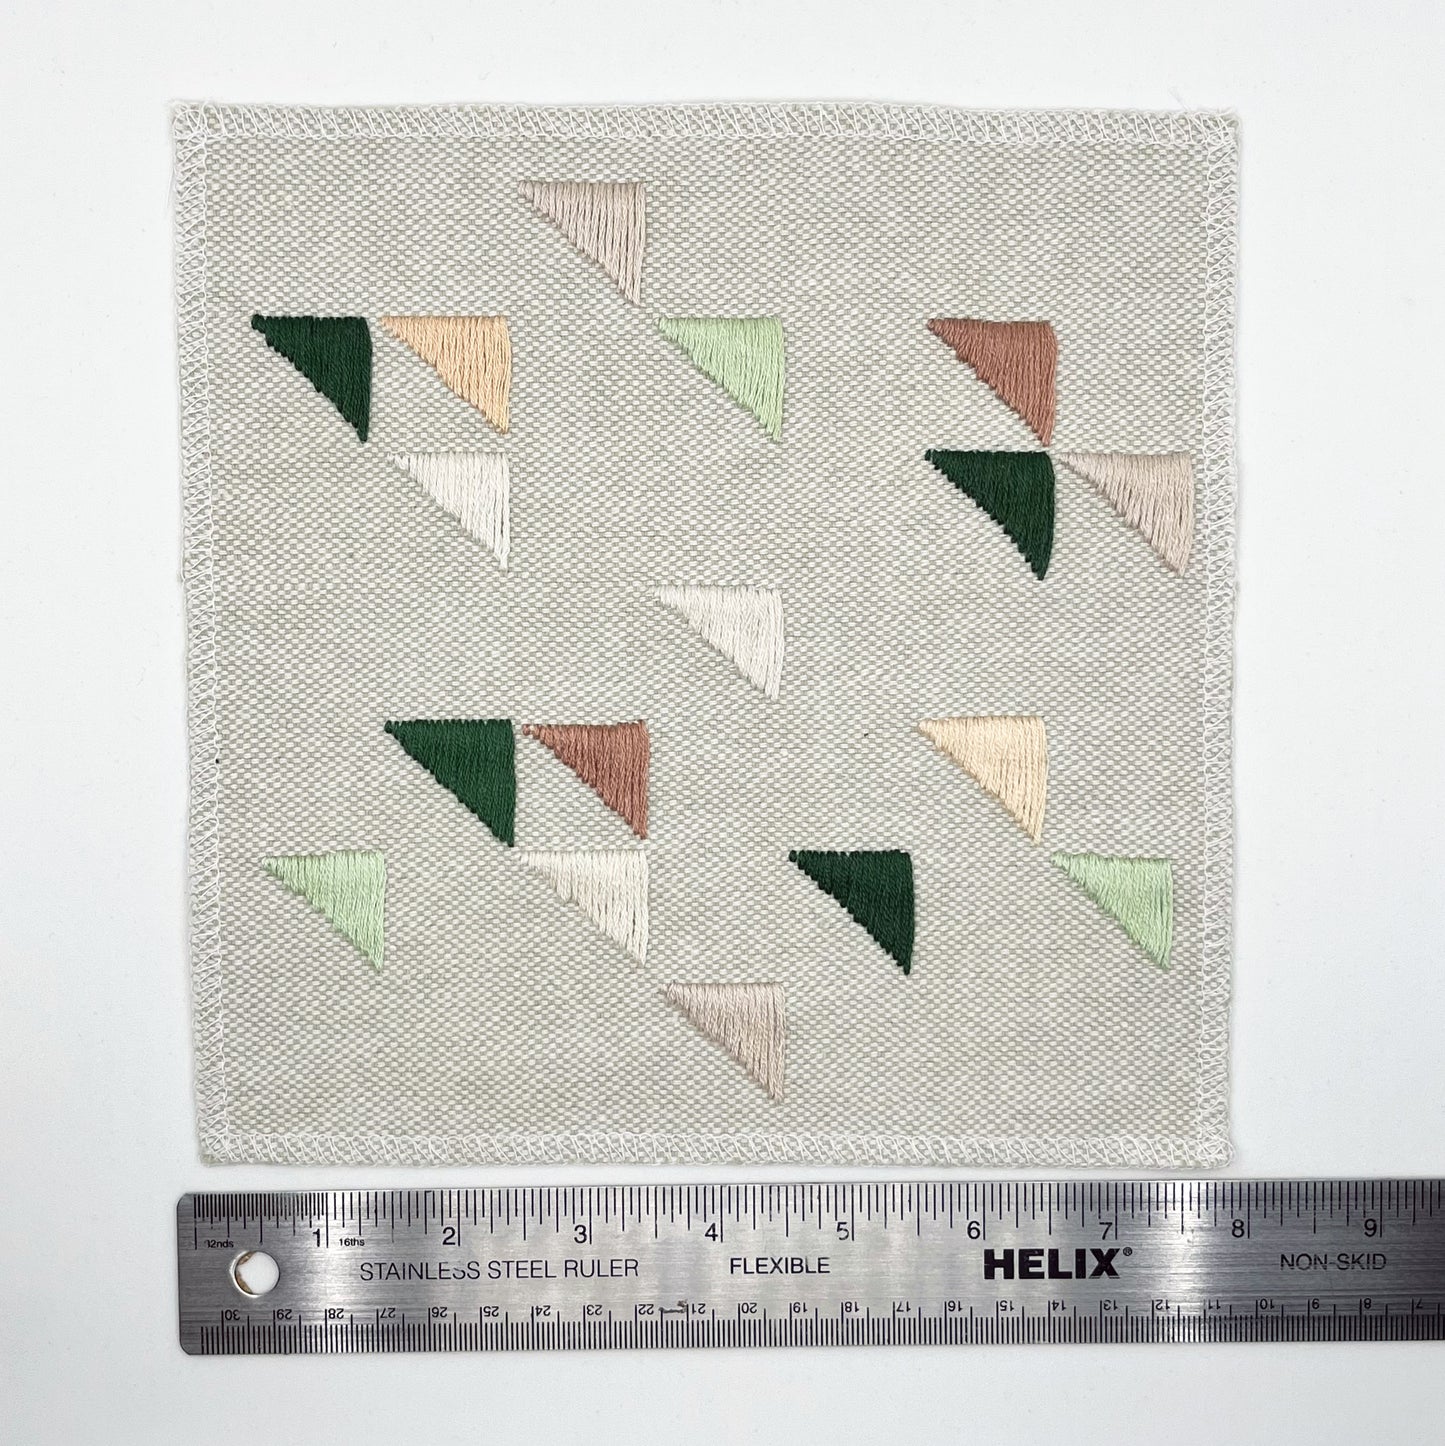 Large square natural colored patch embroidered with randomly placed triangles in peaches, mauves and greens, next to a metal ruler showing a width of 8 inches, on a white background